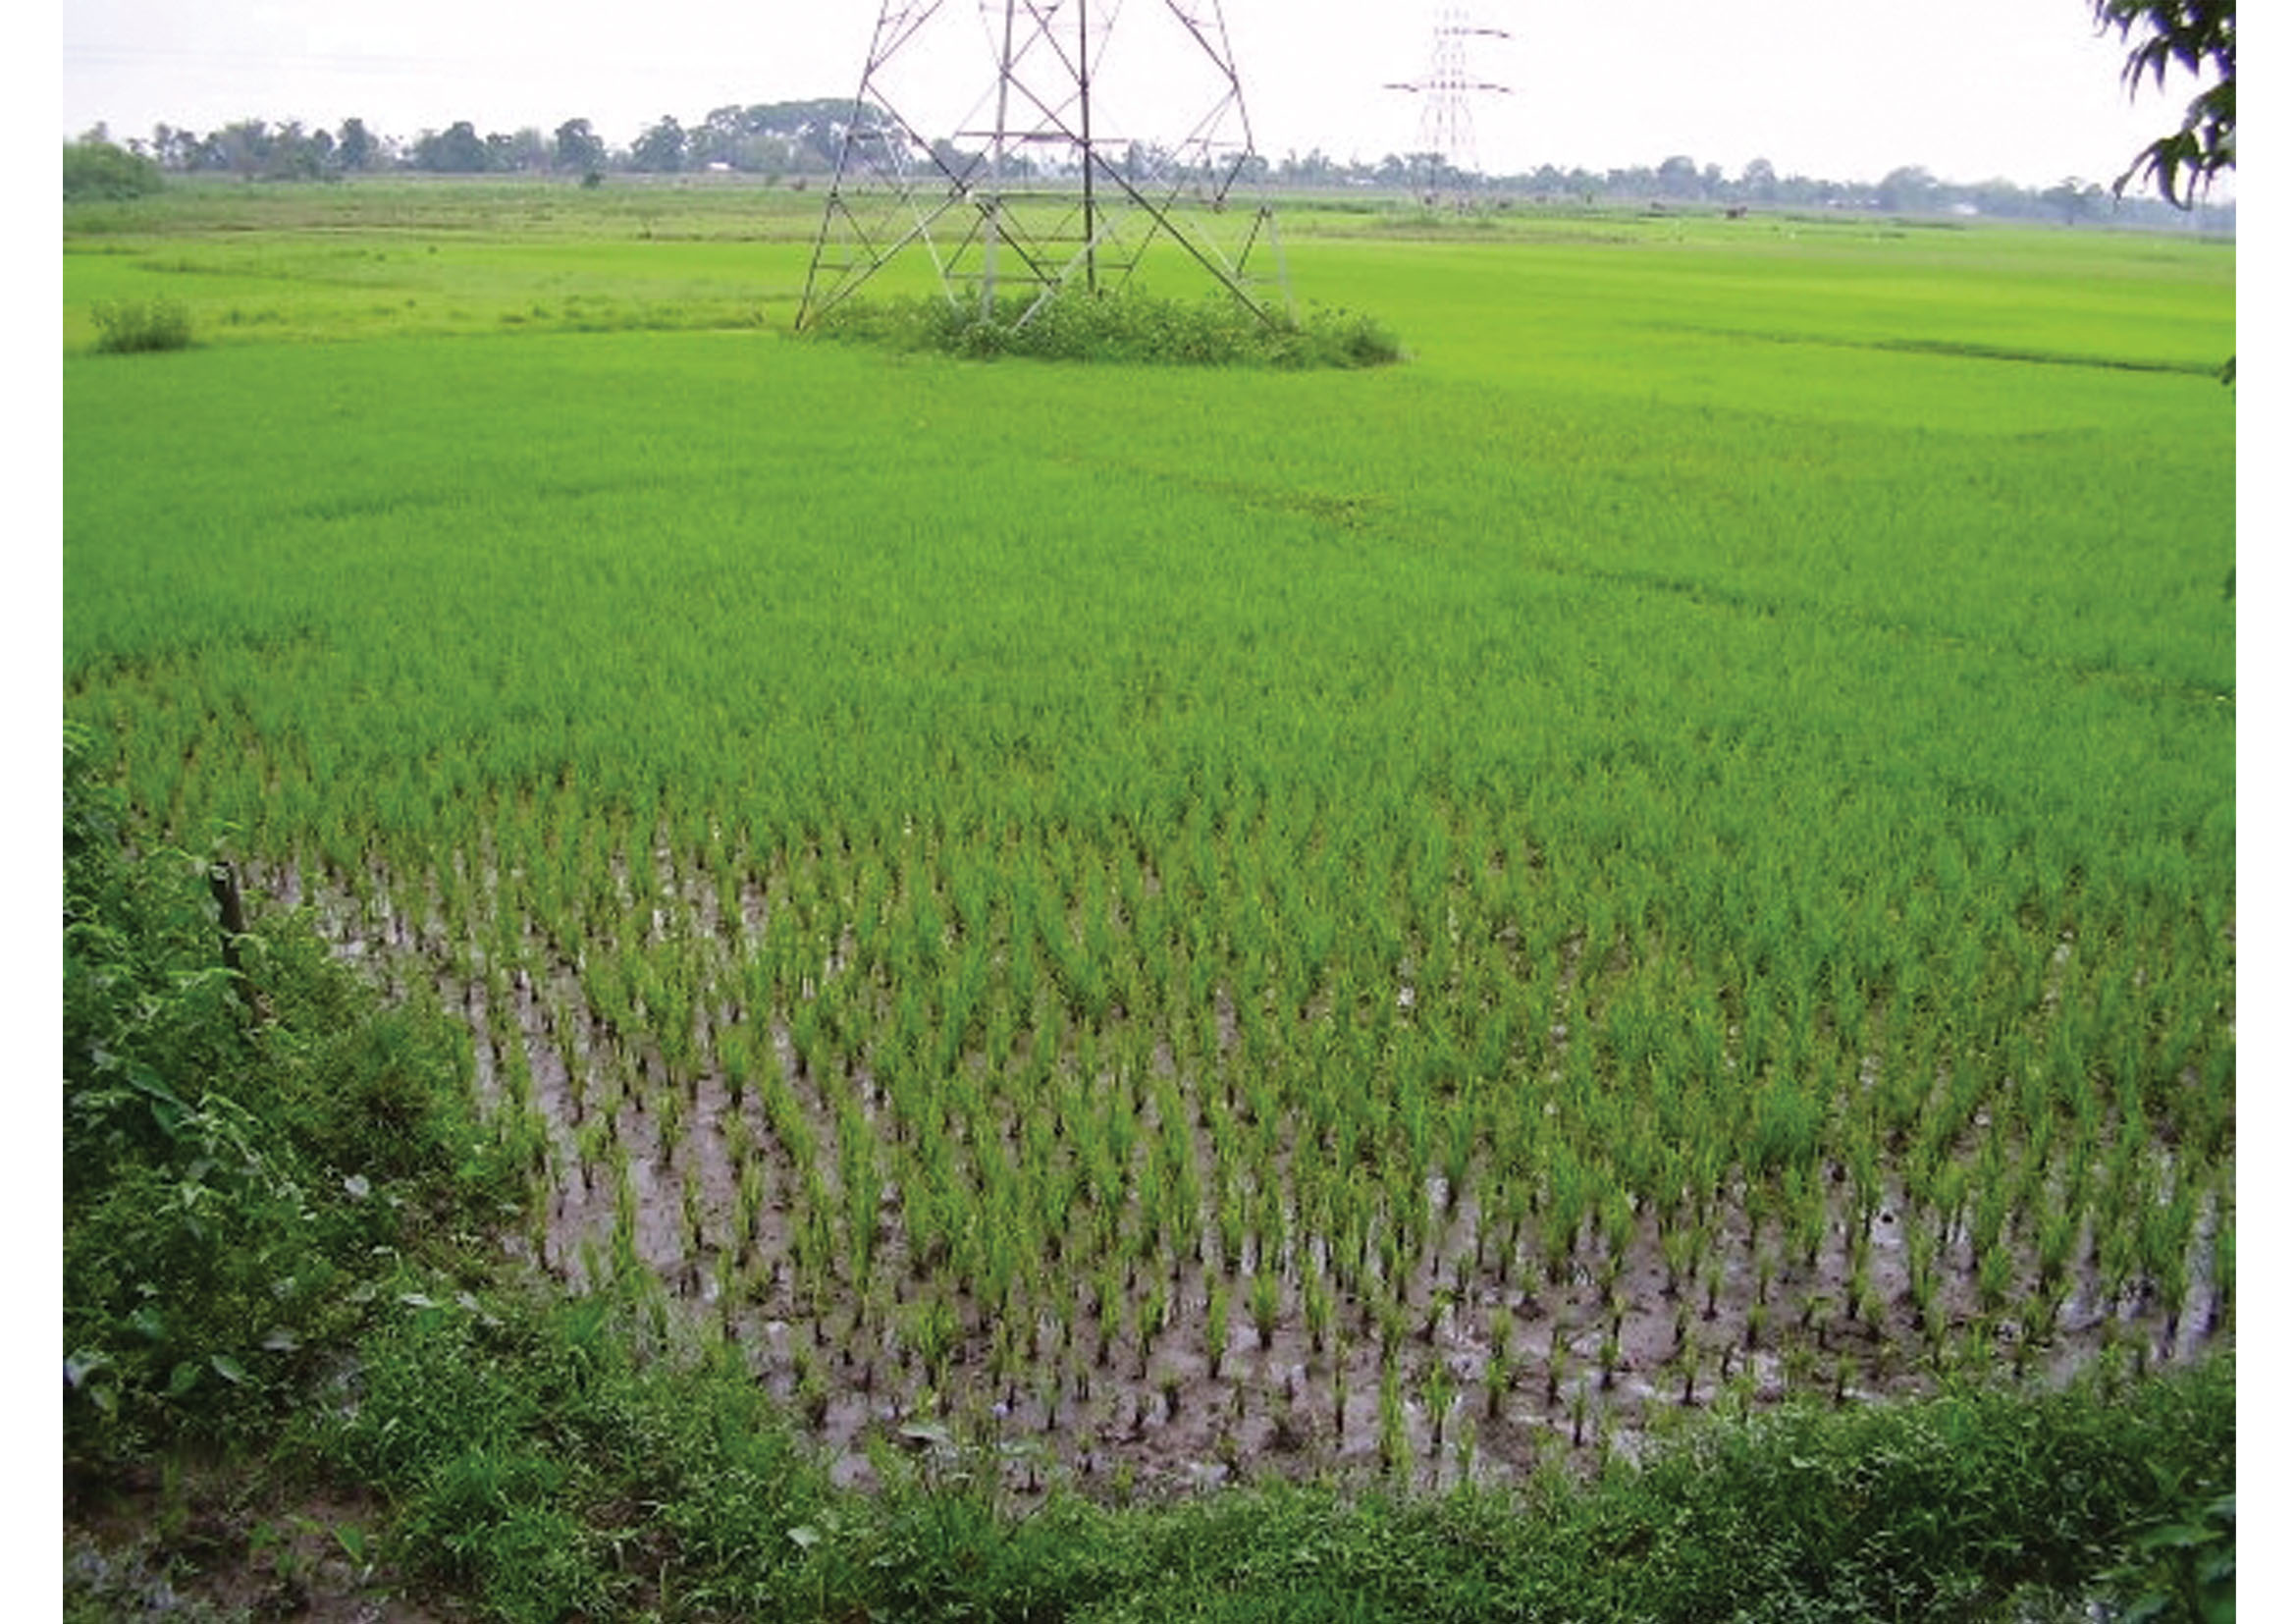 Food Crops in India